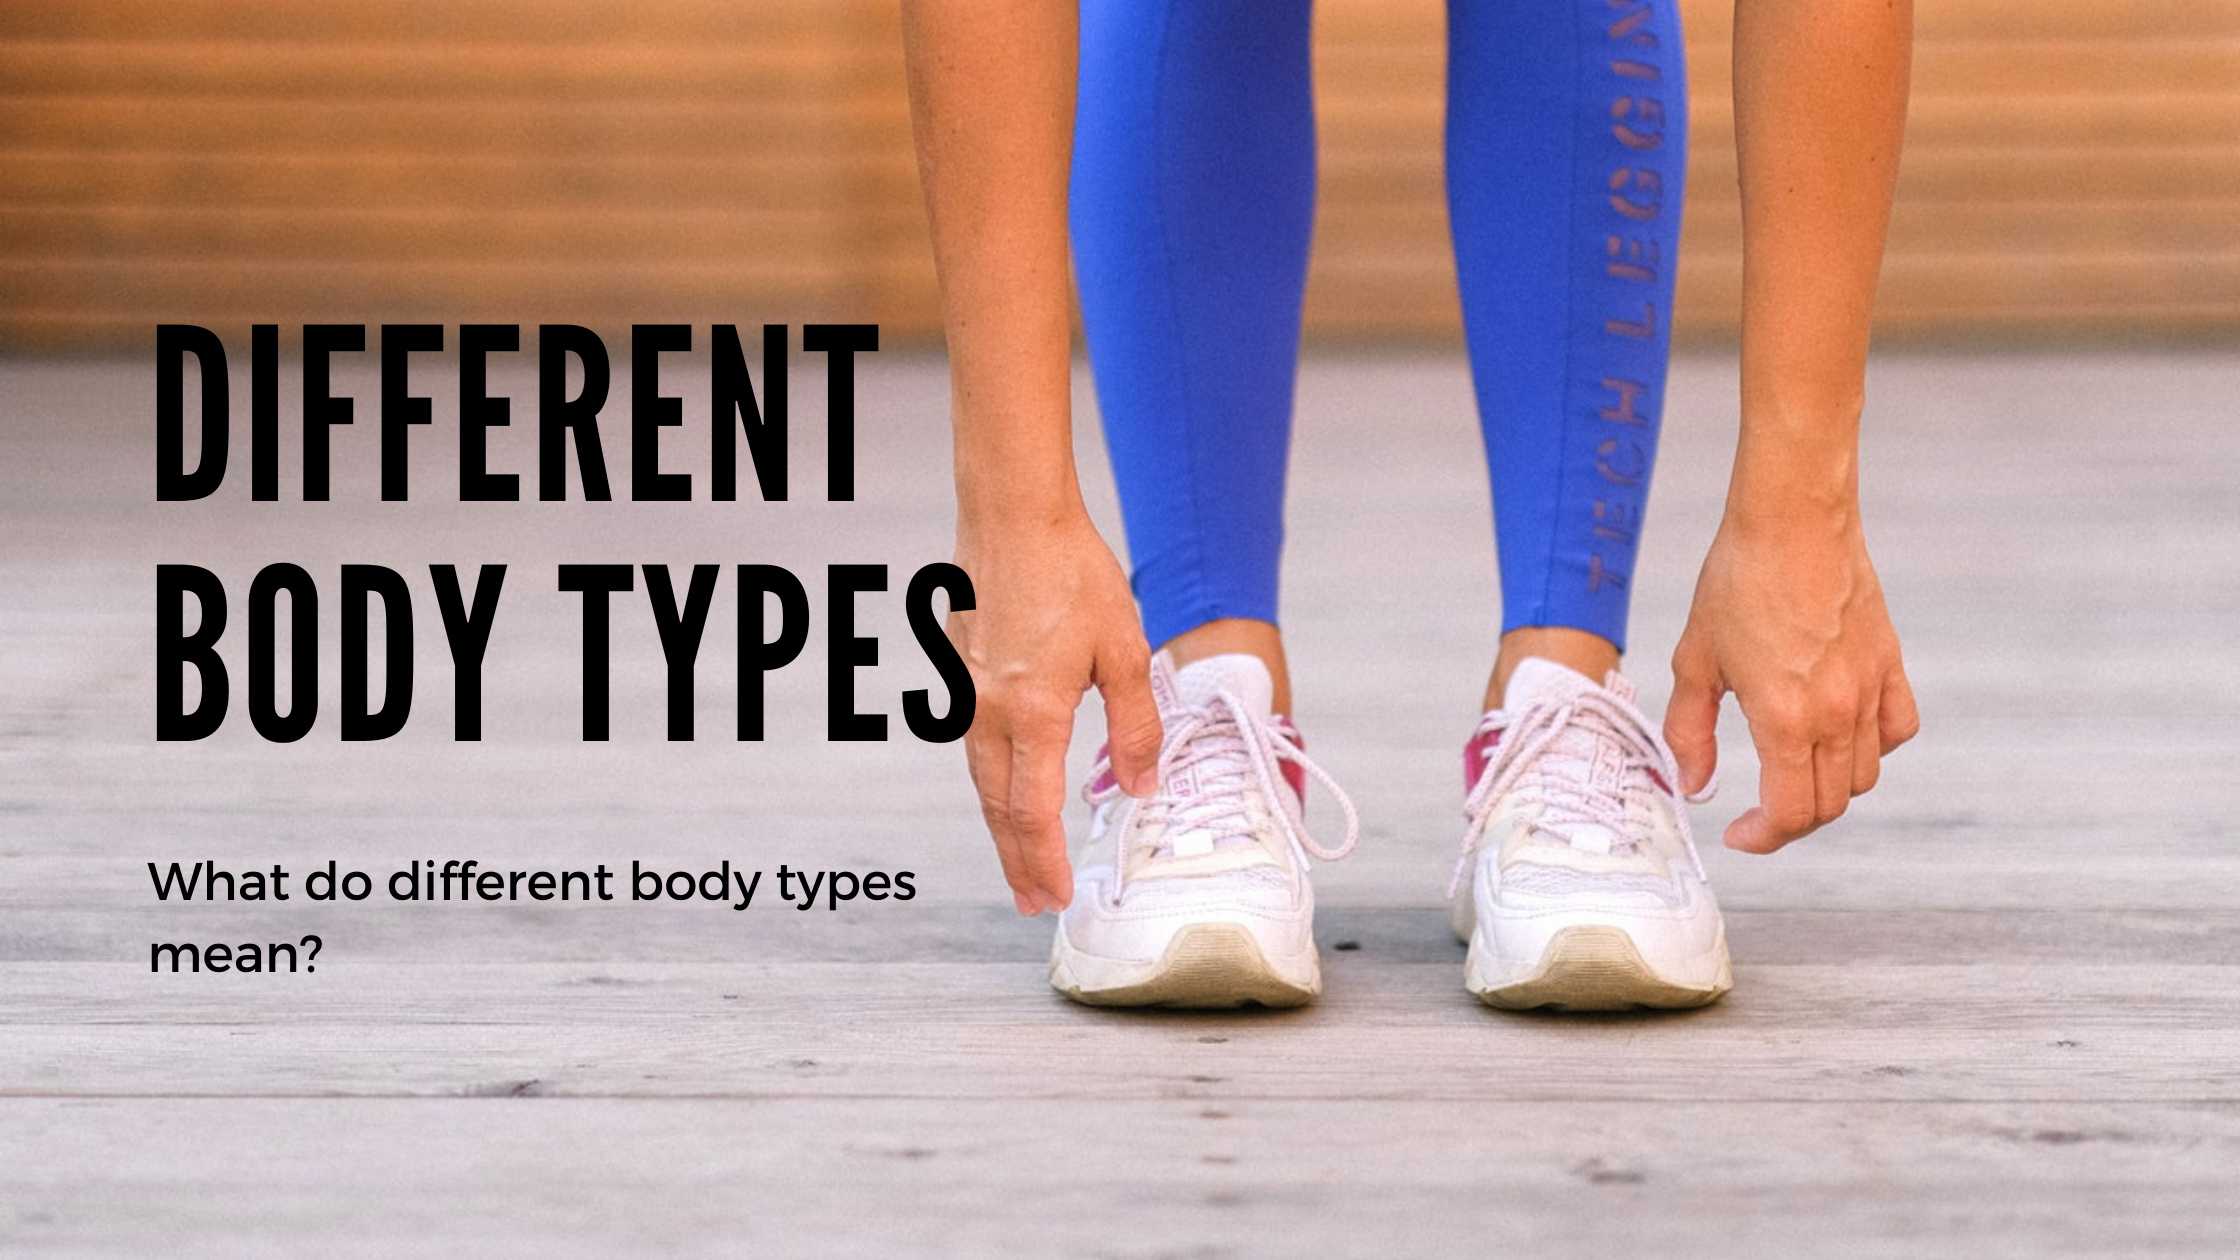 There are 3 different body types